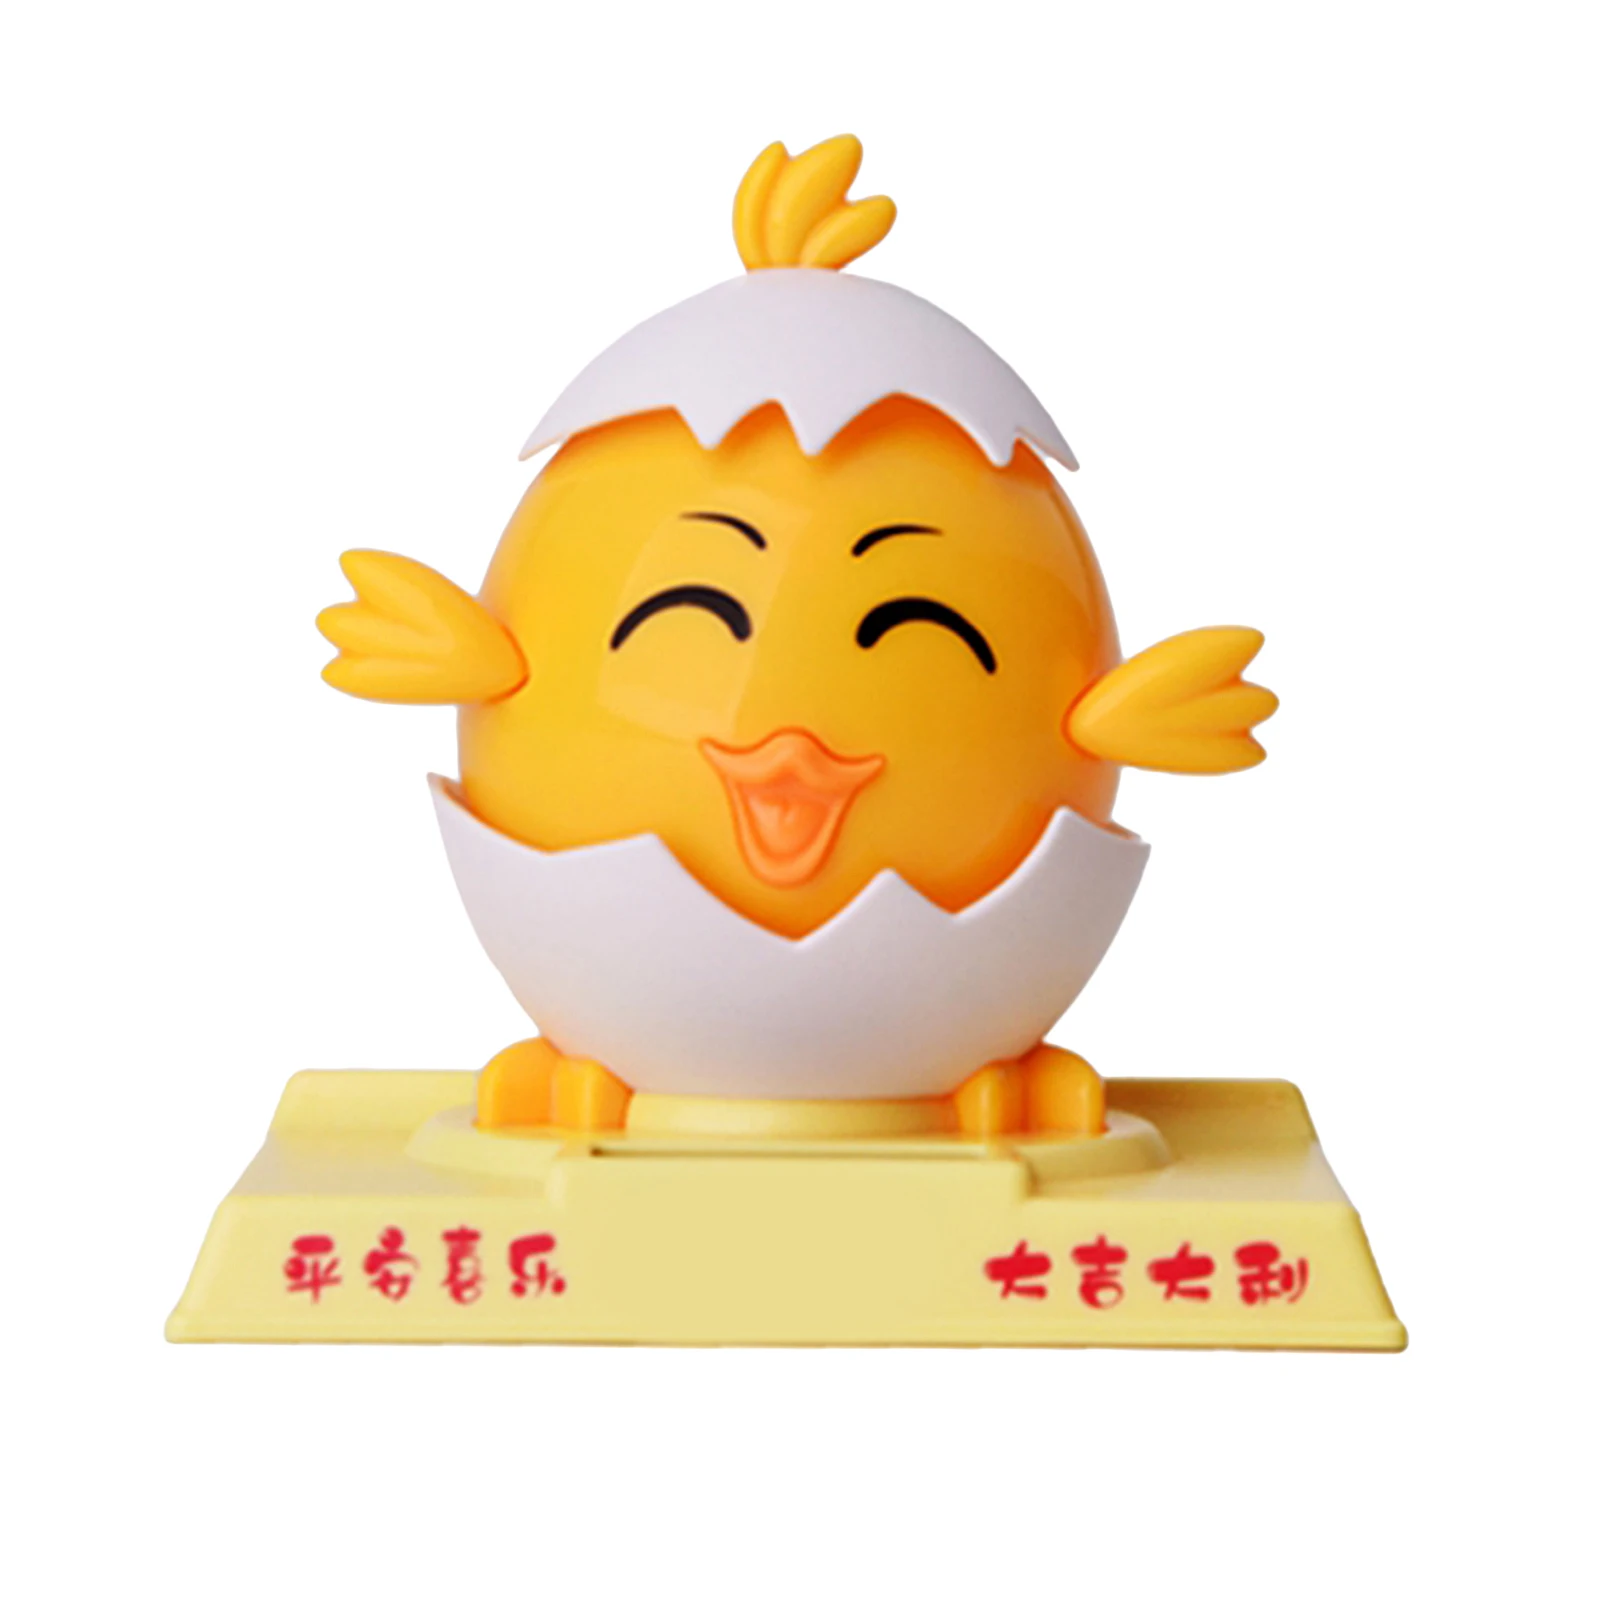 Funny Shaking Head Dancing Little Chick Interior Decoration Bobble Head Doll